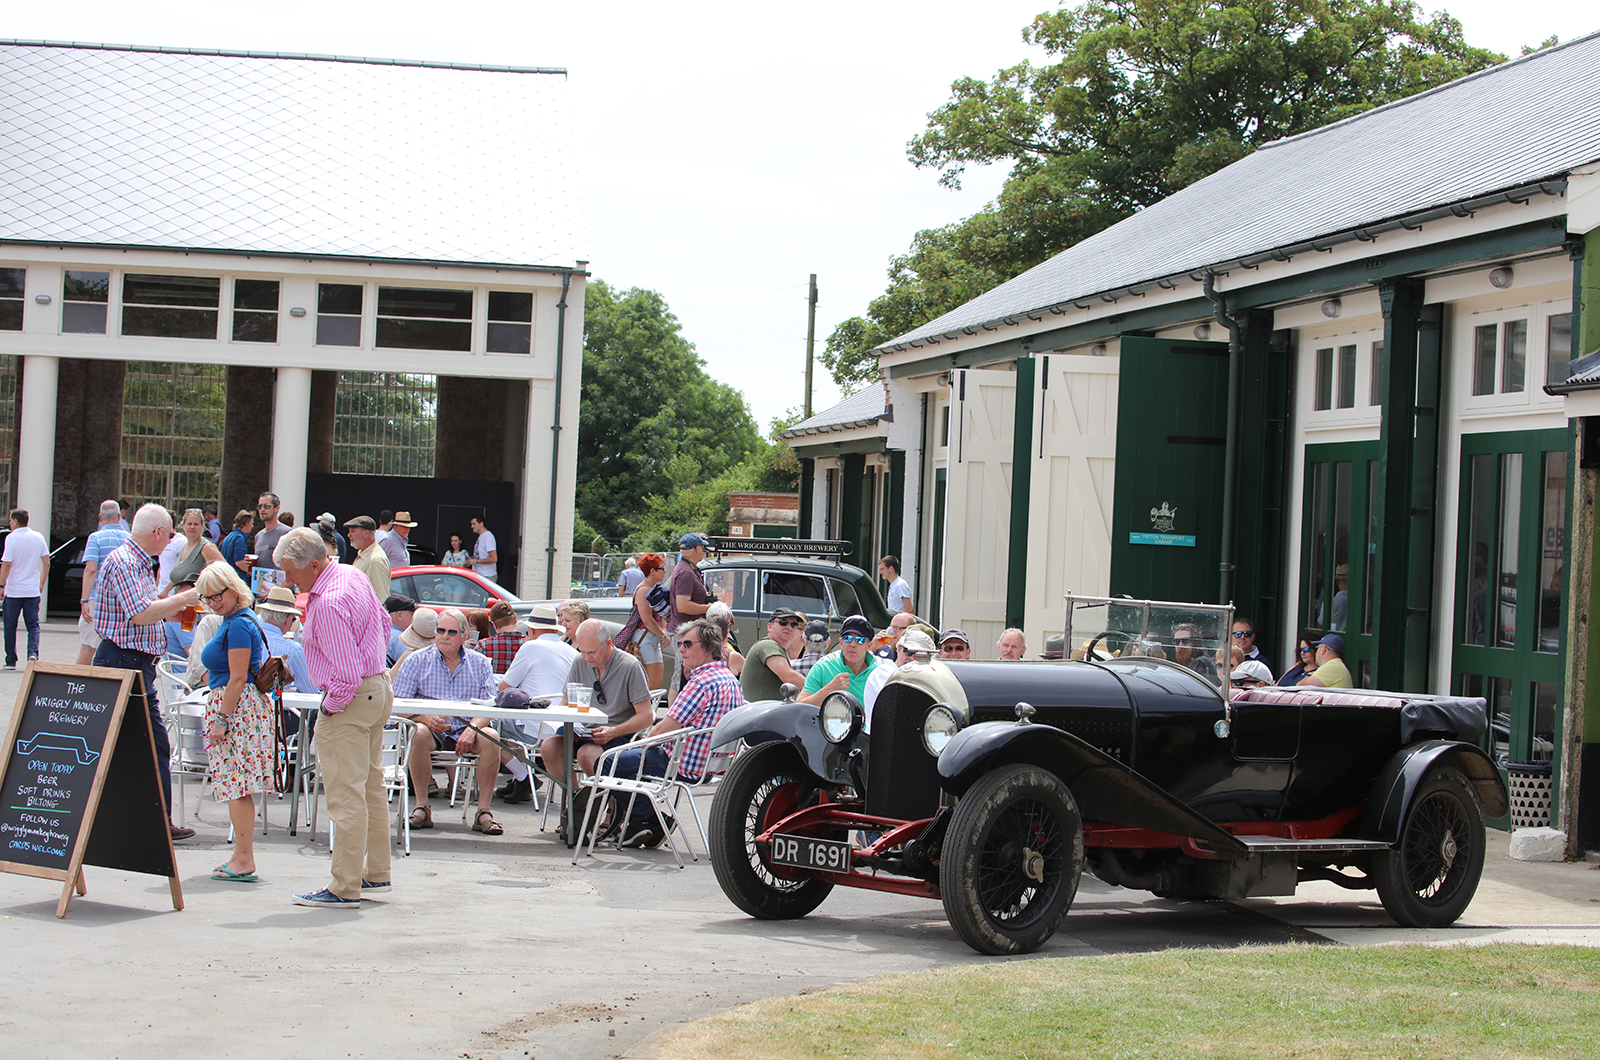 The sun shines on The Classic & Sports Car Show in association with Flywheel 